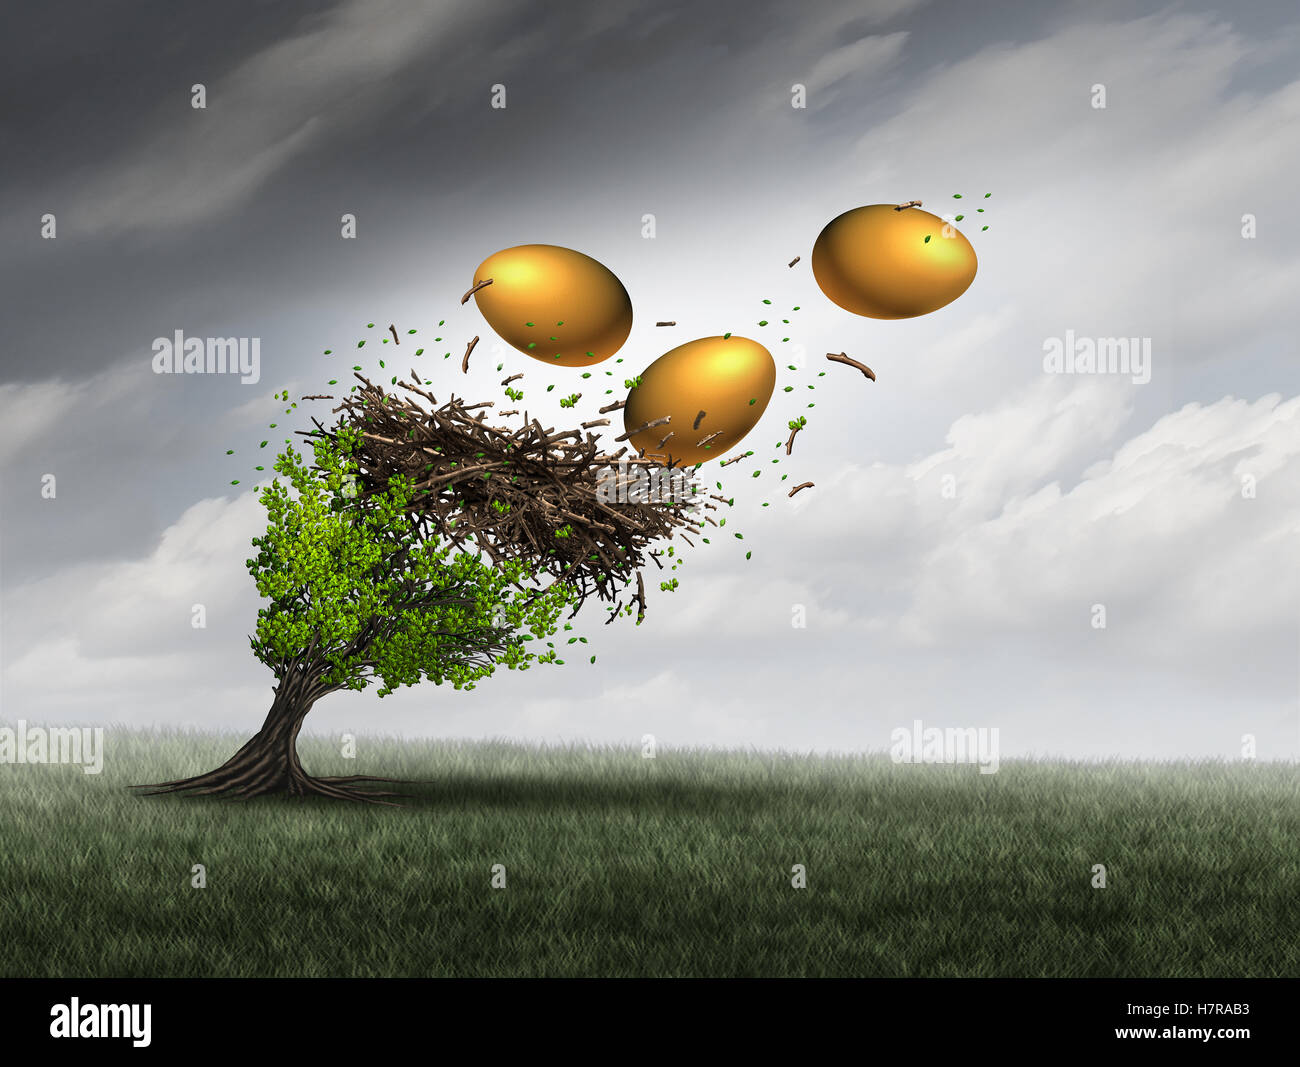 Retirement fund crisis concept as a tree in peril with a nest and gold eggs falling out during a destructive thunder storm as a Stock Photo